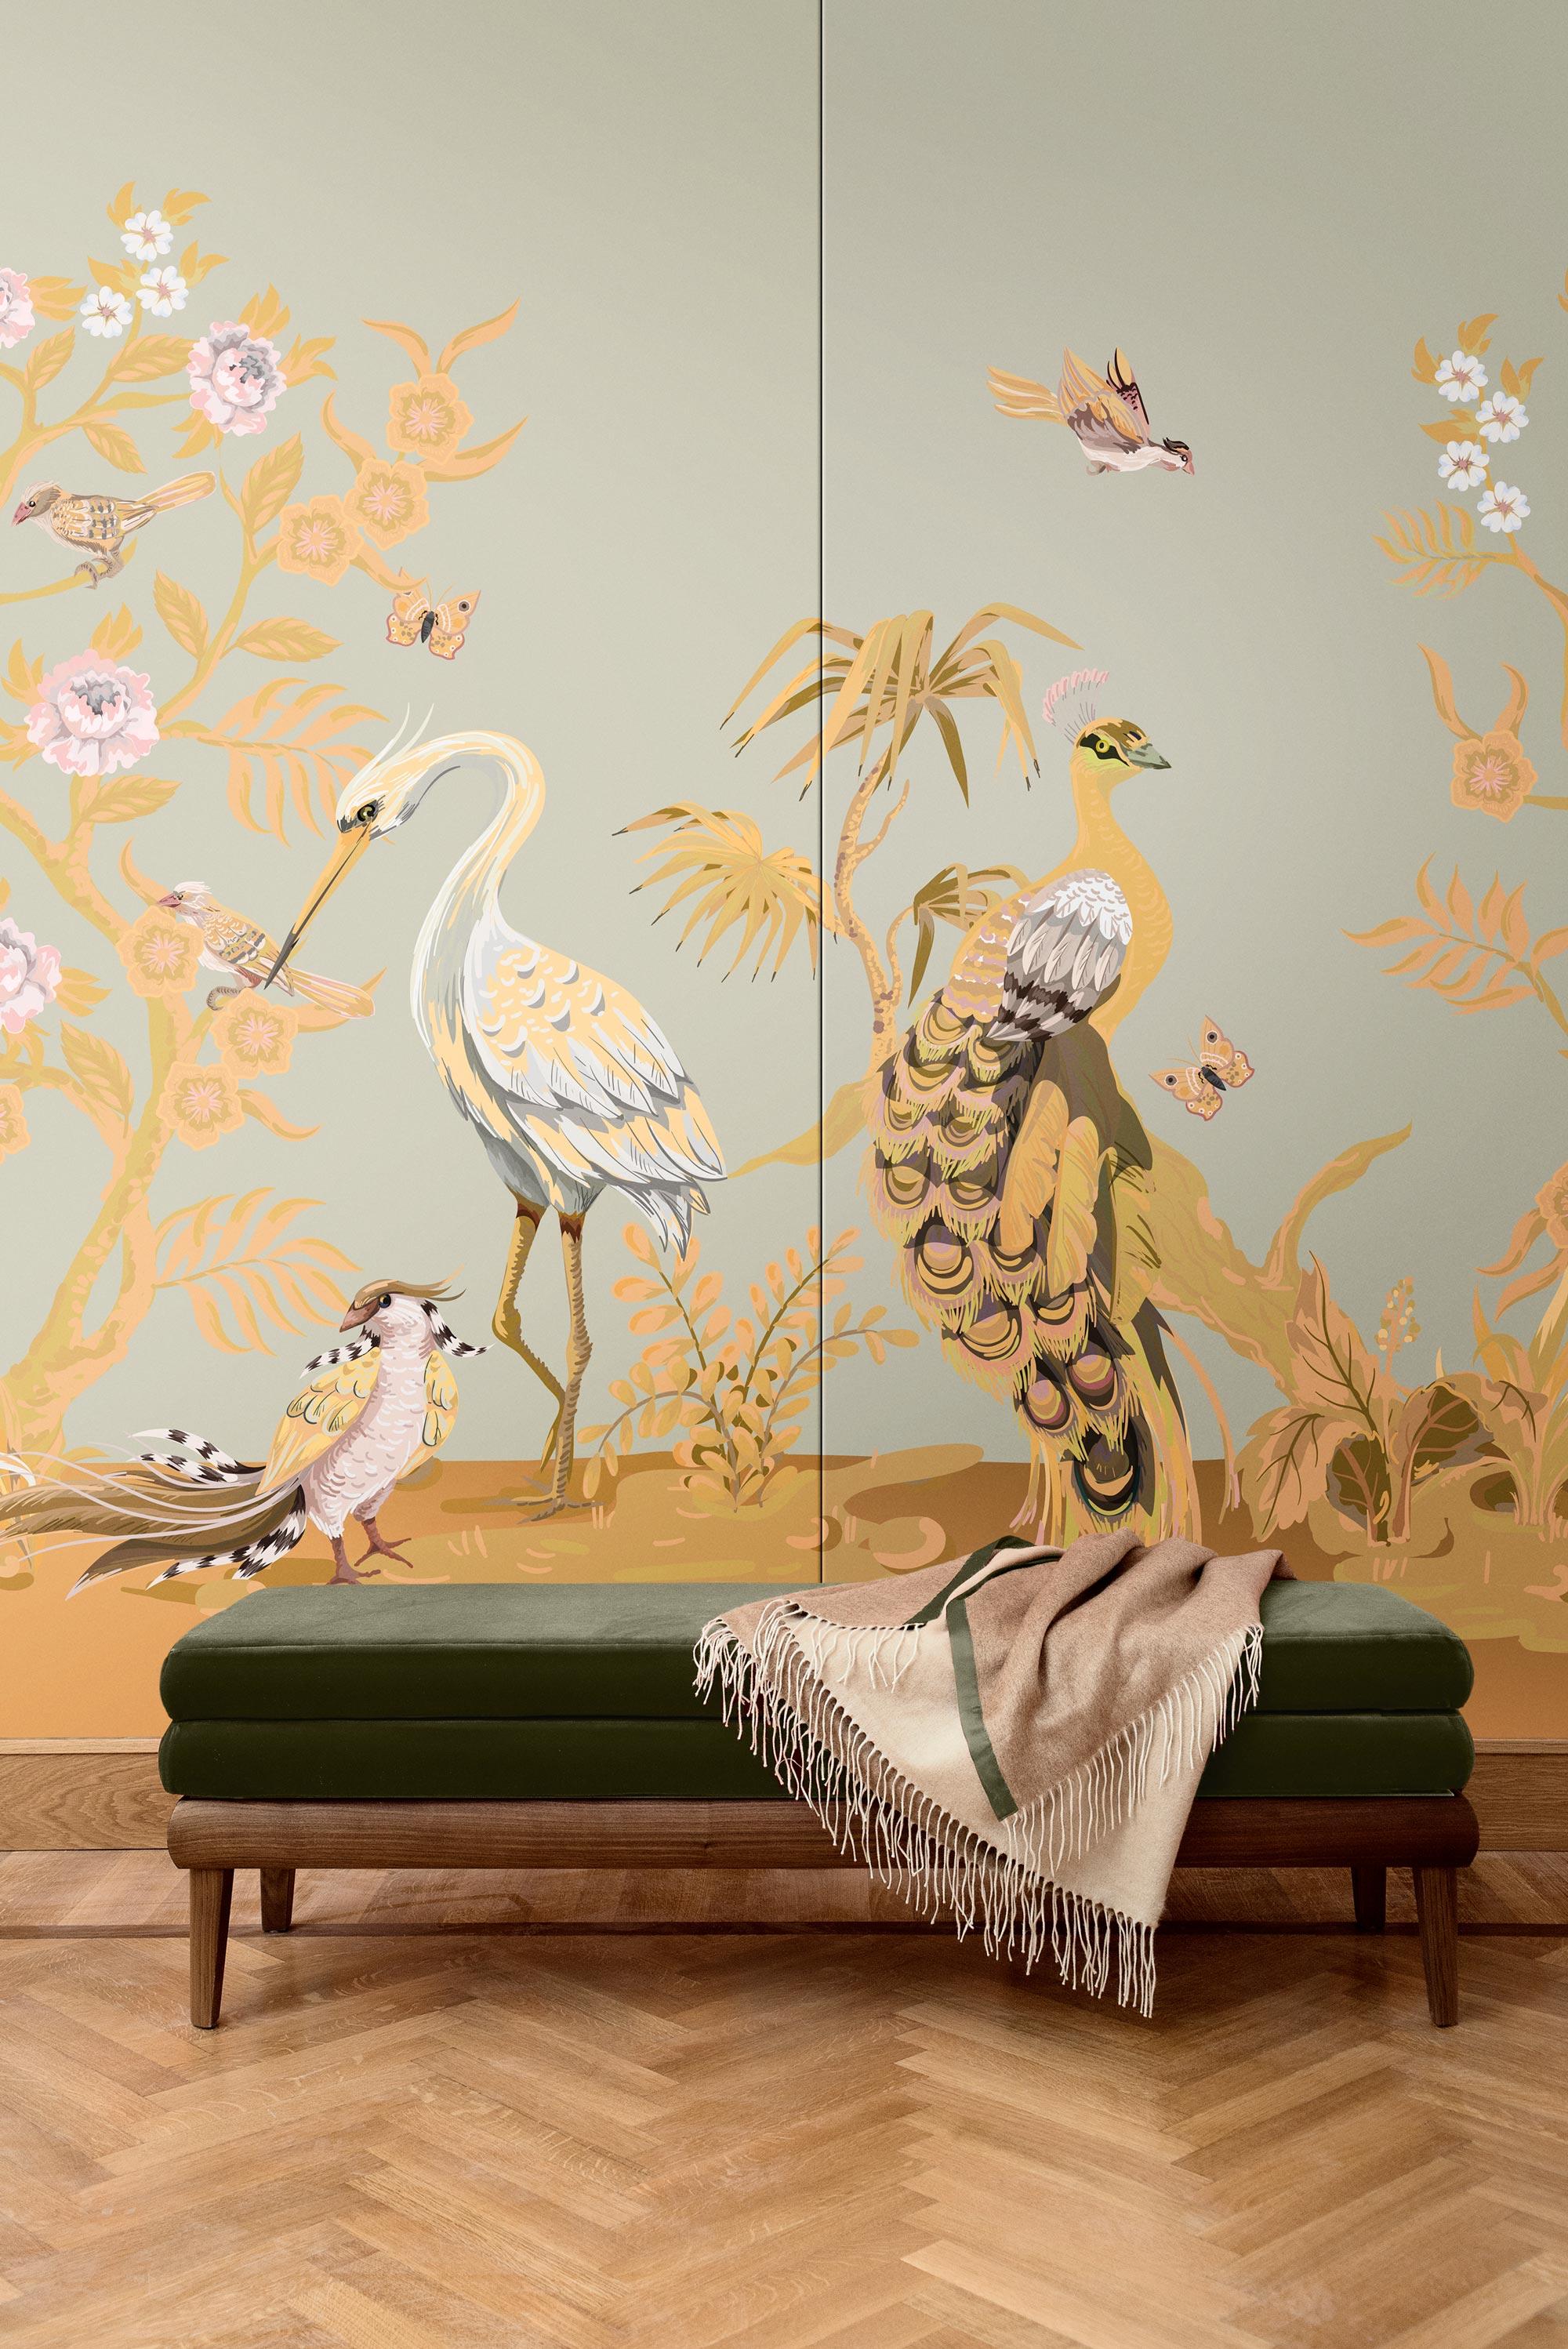 The Peacock and Herons collection recalls the richness of an 18th century decoration interpreted with particular dimensions of the design and colors, which make it current and highly decorative.